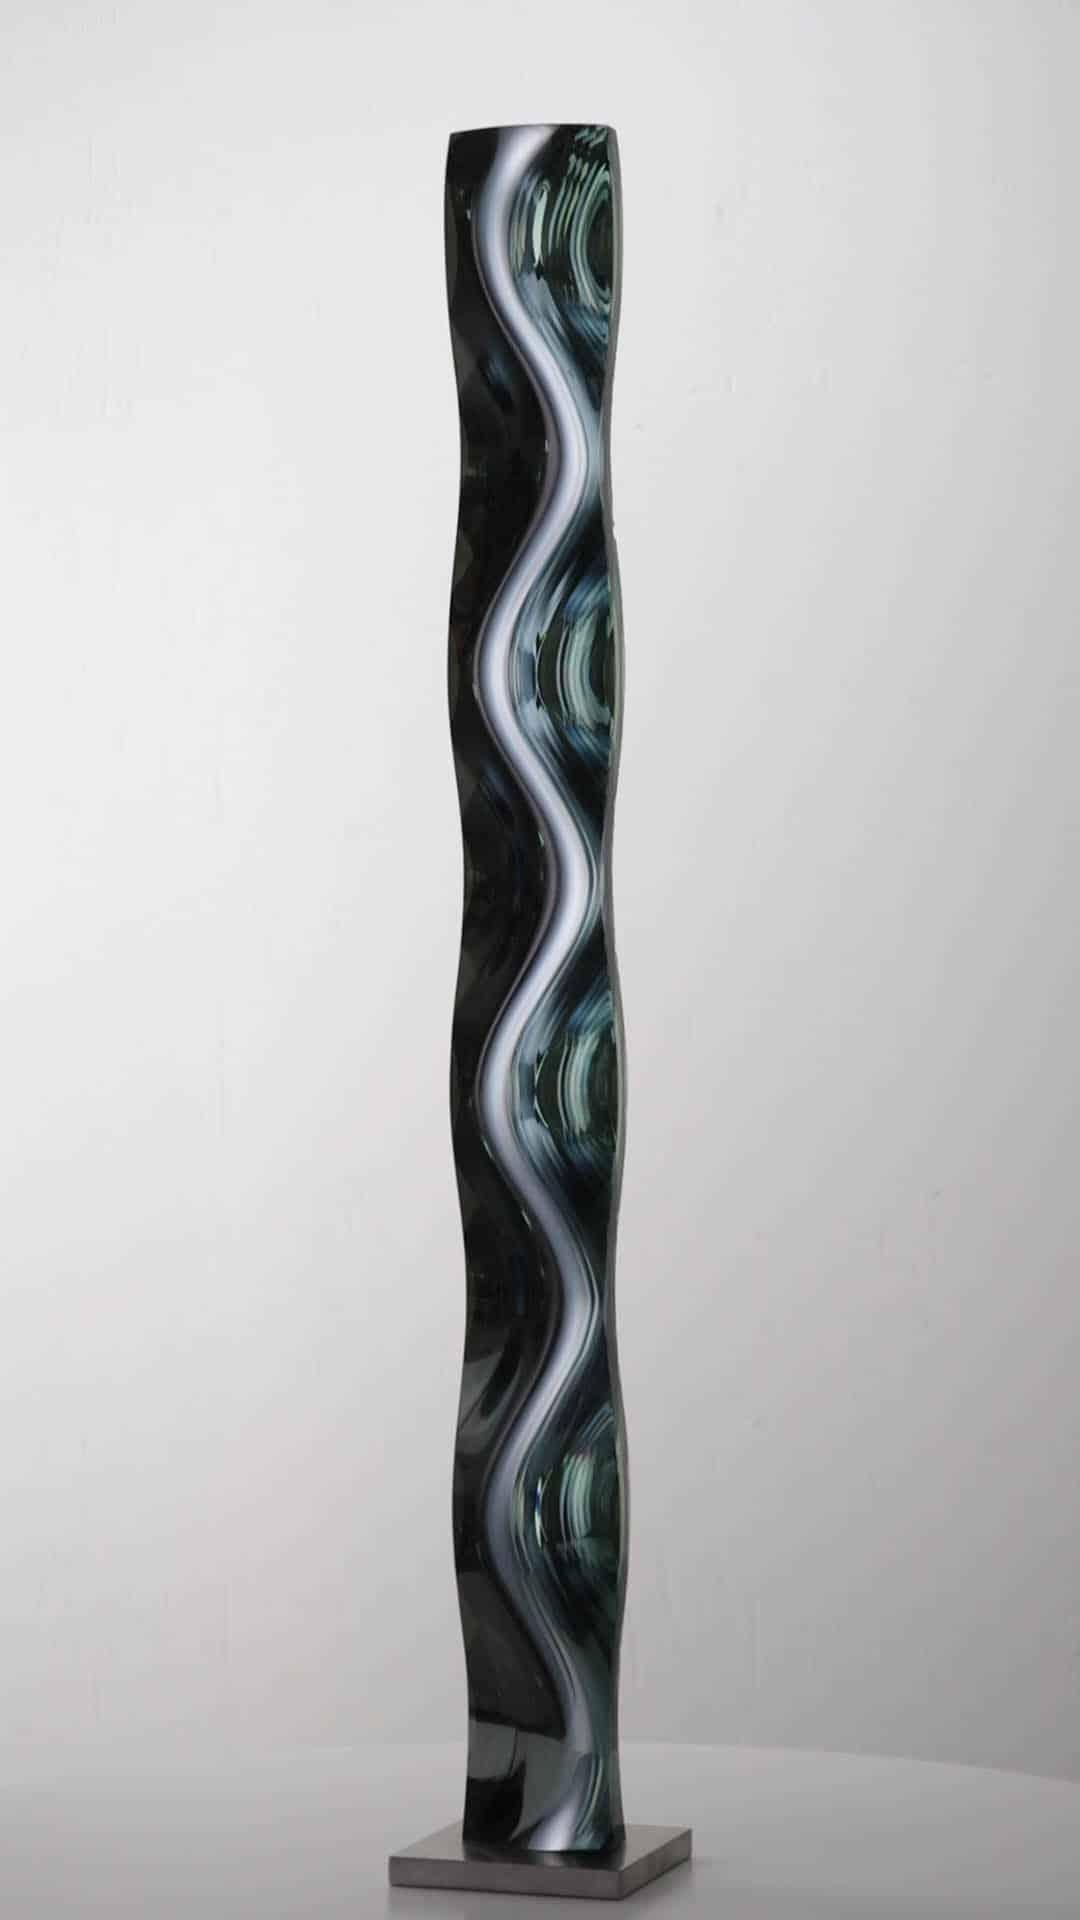 M.190402 by Toshio Iezumi - Contemporary glass sculpture, green, abstract For Sale 3